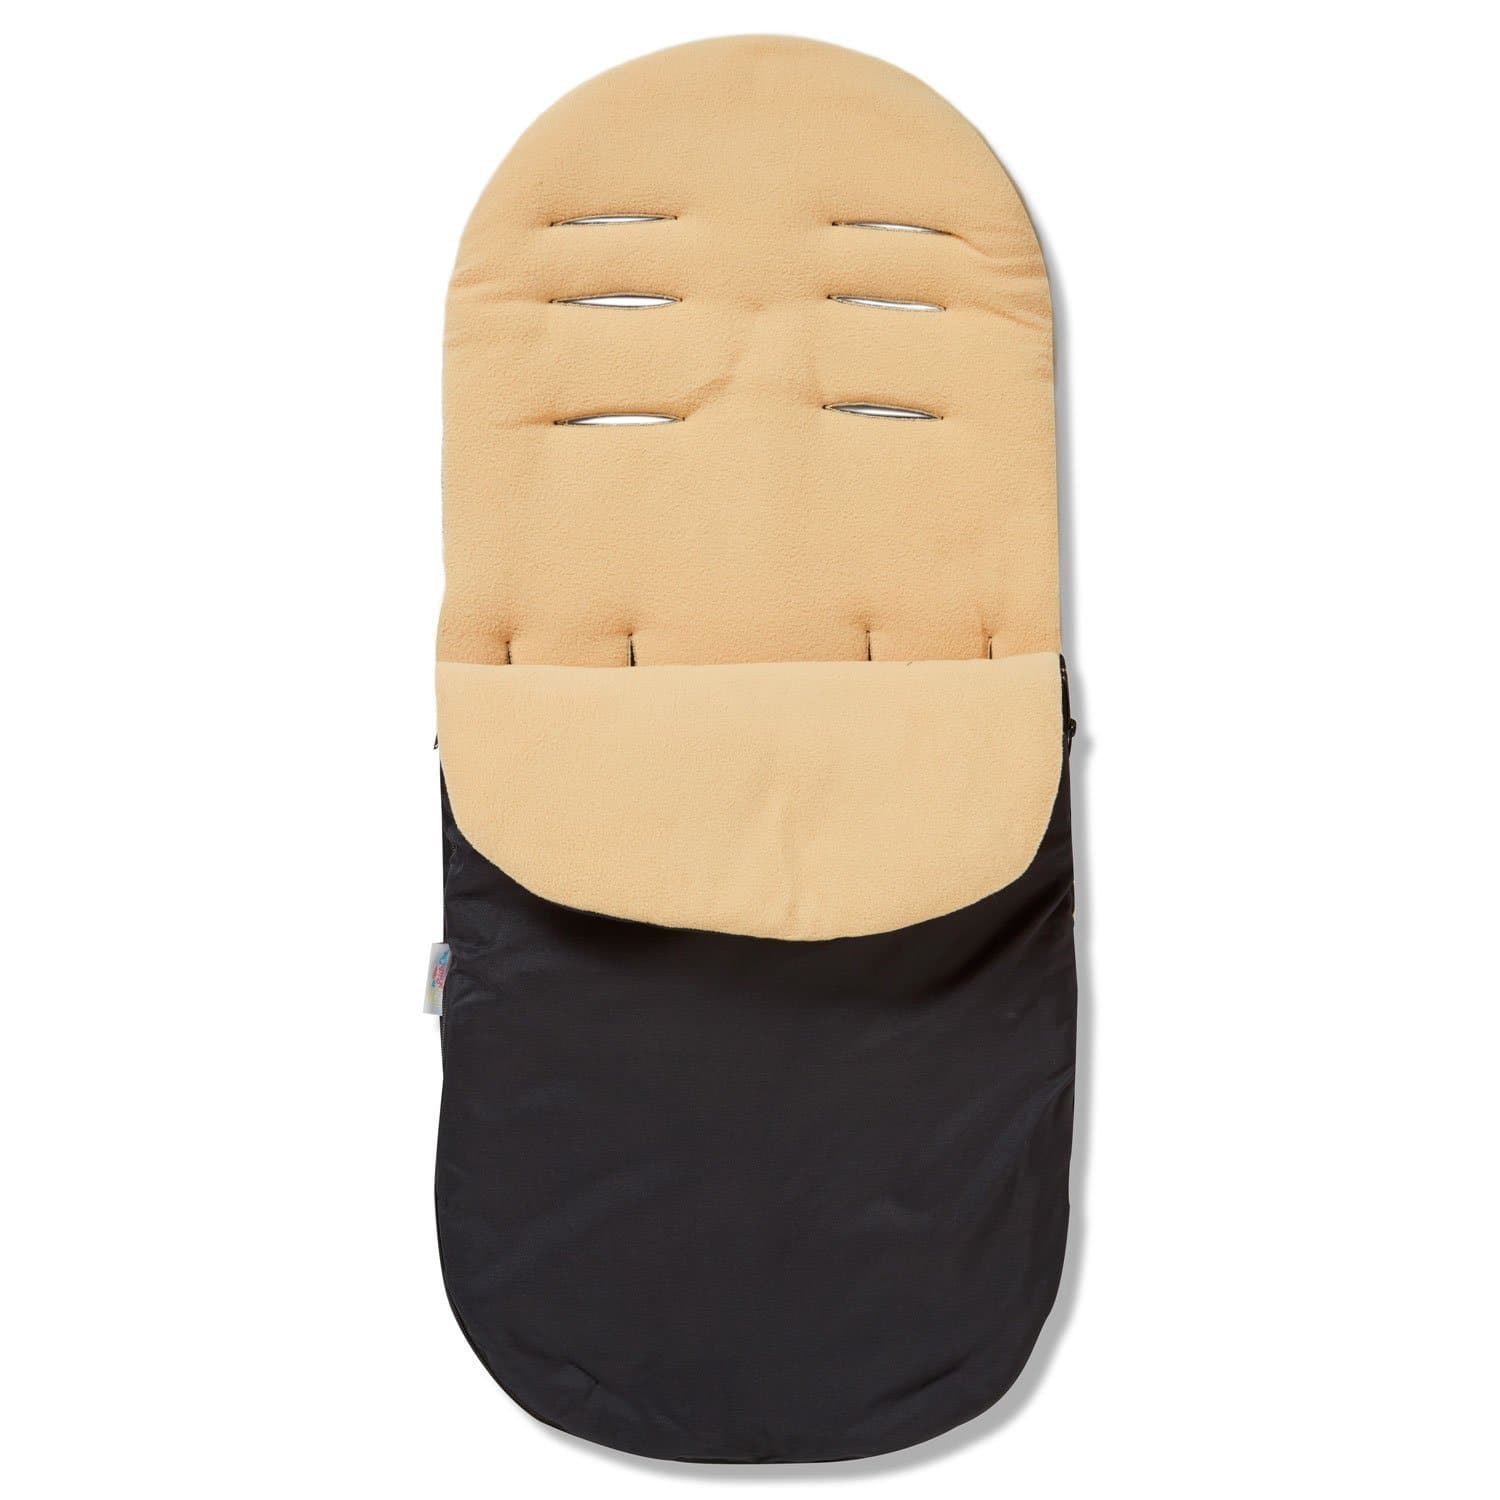 Footmuff / Cosy Toes Compatible with Koelstra - Sand / Fits All Models | For Your Little One